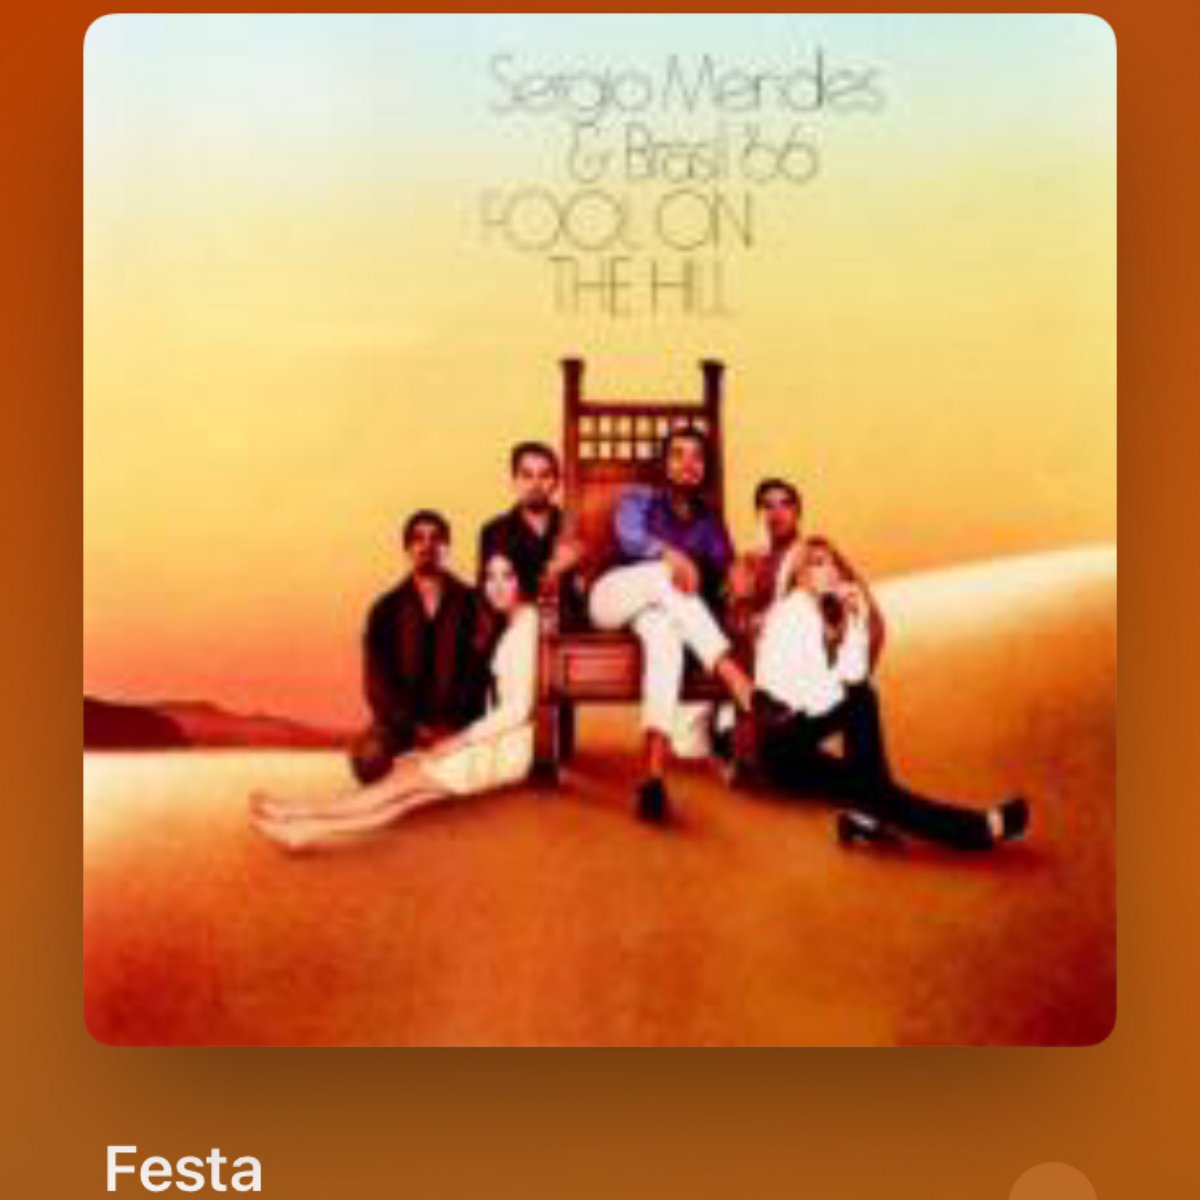 #NowPlaying
🎵 Festa
by 🎵 Sergio Mendes & Brasil '66
from 🎵 Fool on the Hill
#SergioMendes #piano #セルメン